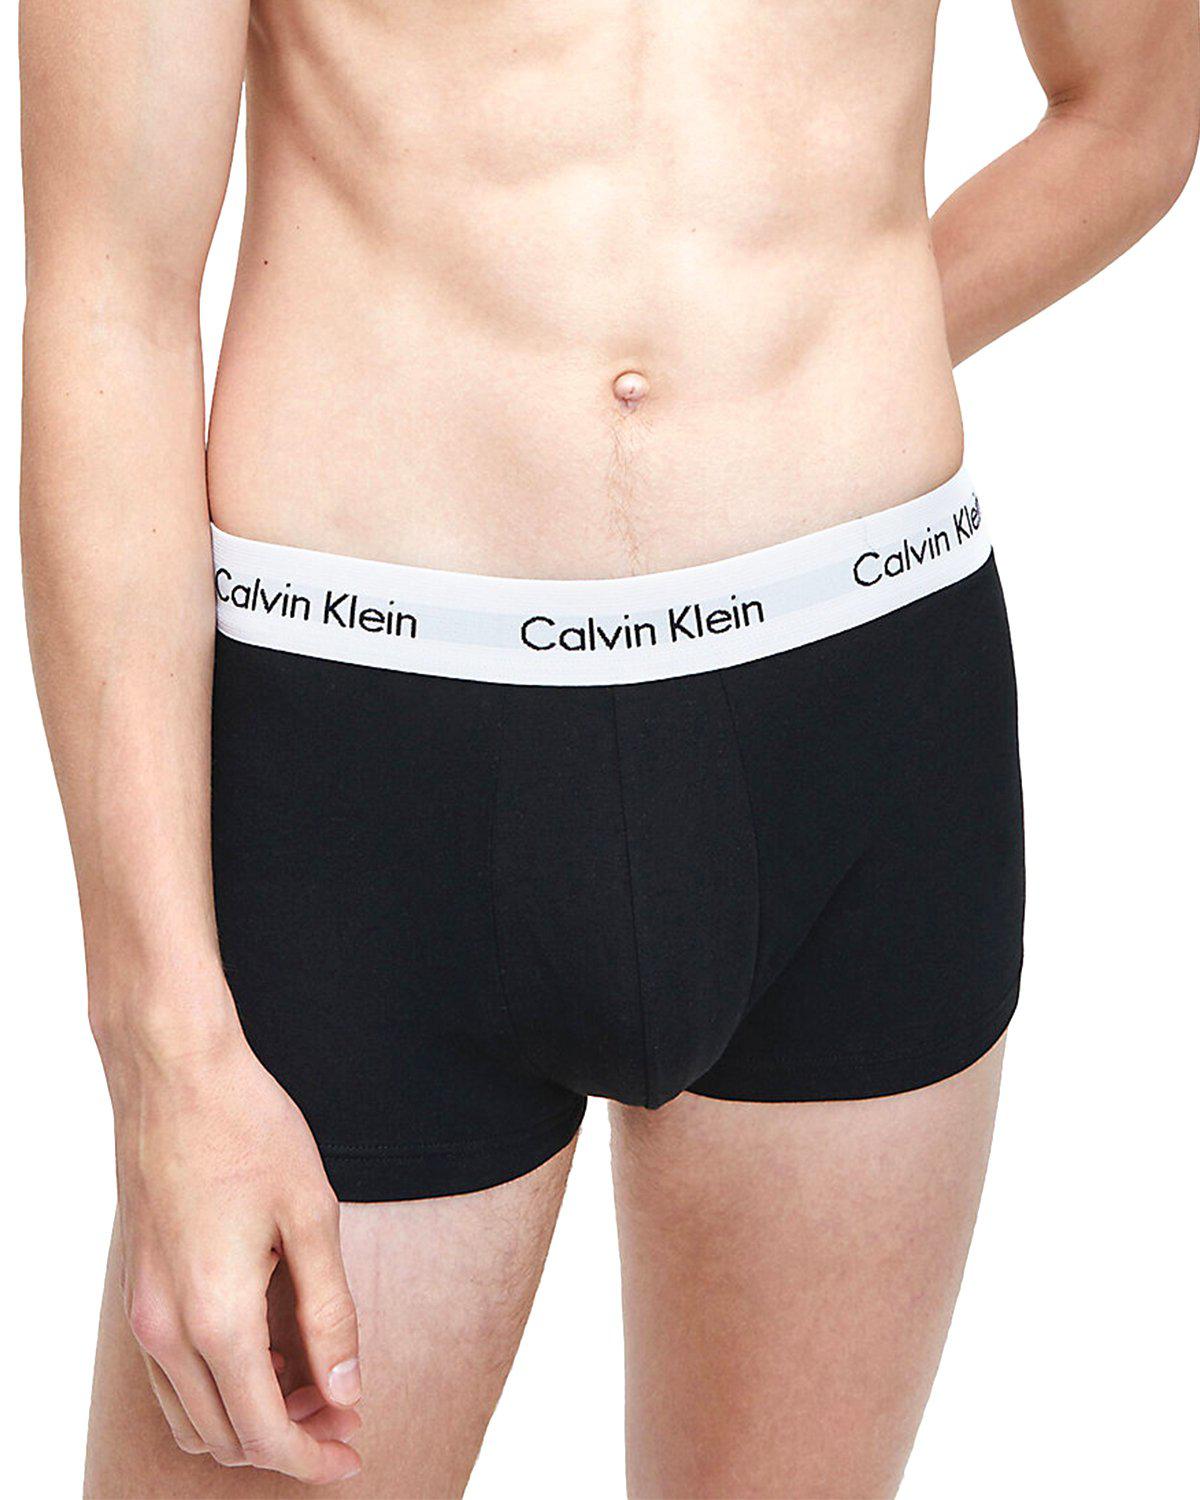 Calvin Klein 3 Pack Trunks, Save 20% on Subscription